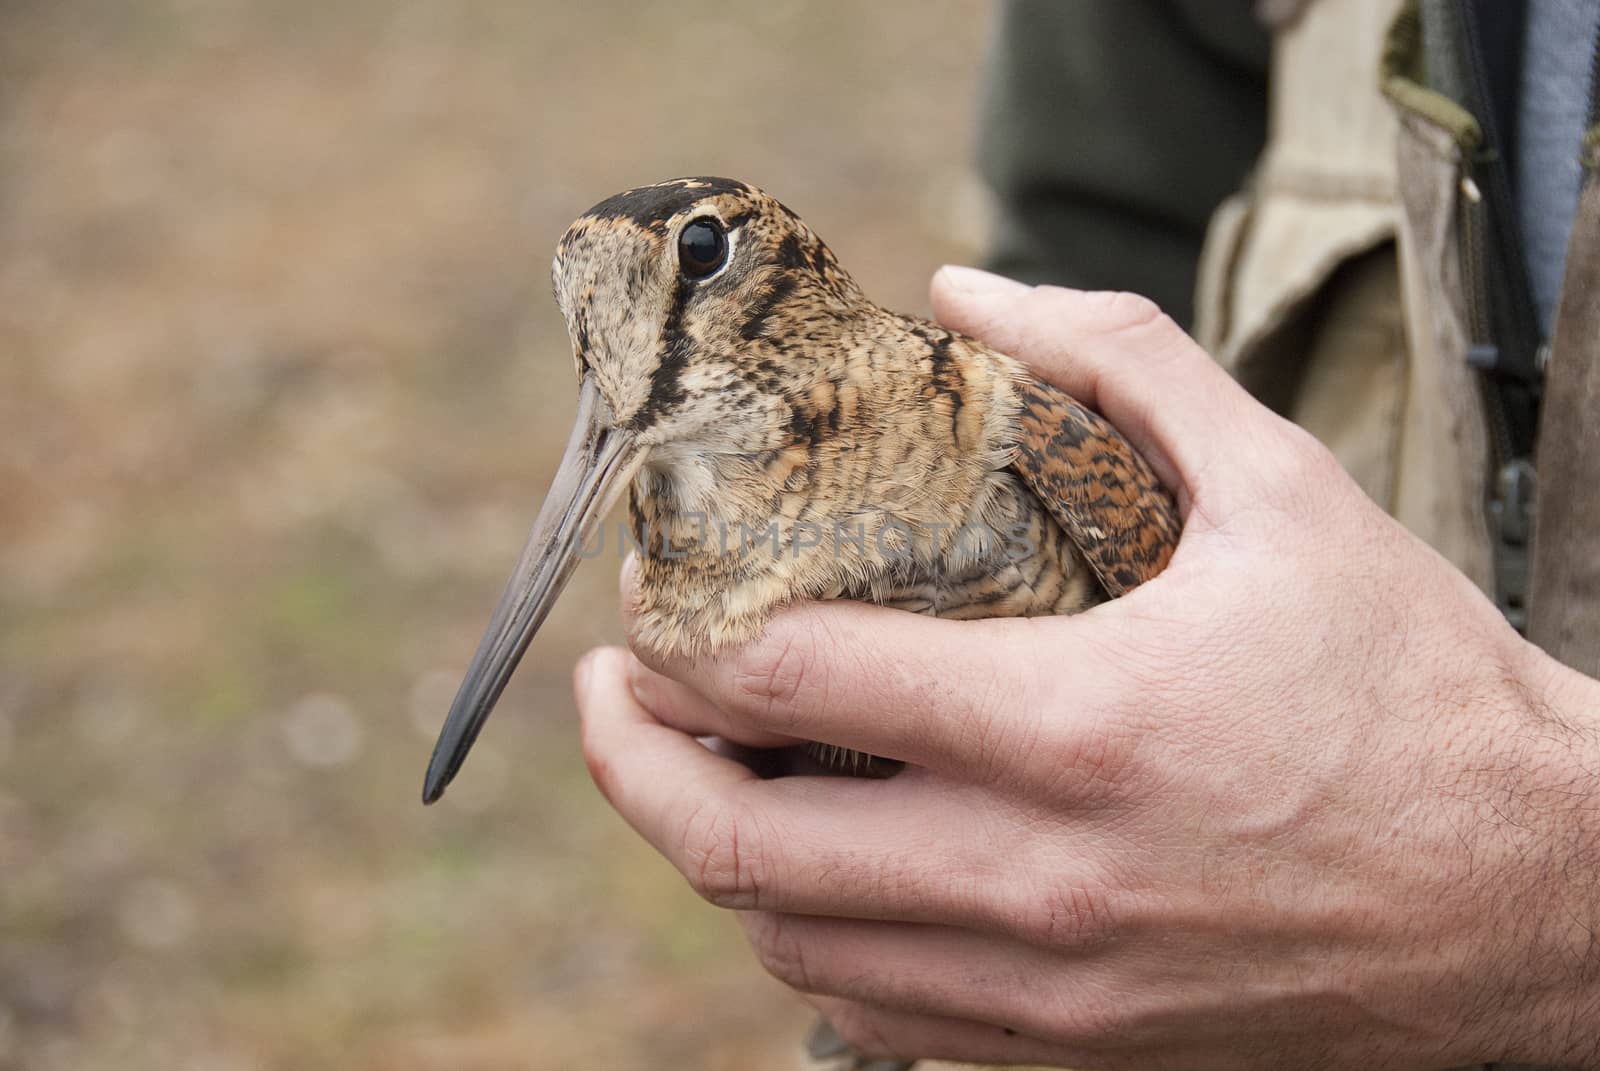 Eurasian woodcock, Scolopax rusticola, in the hands of an ornithologis